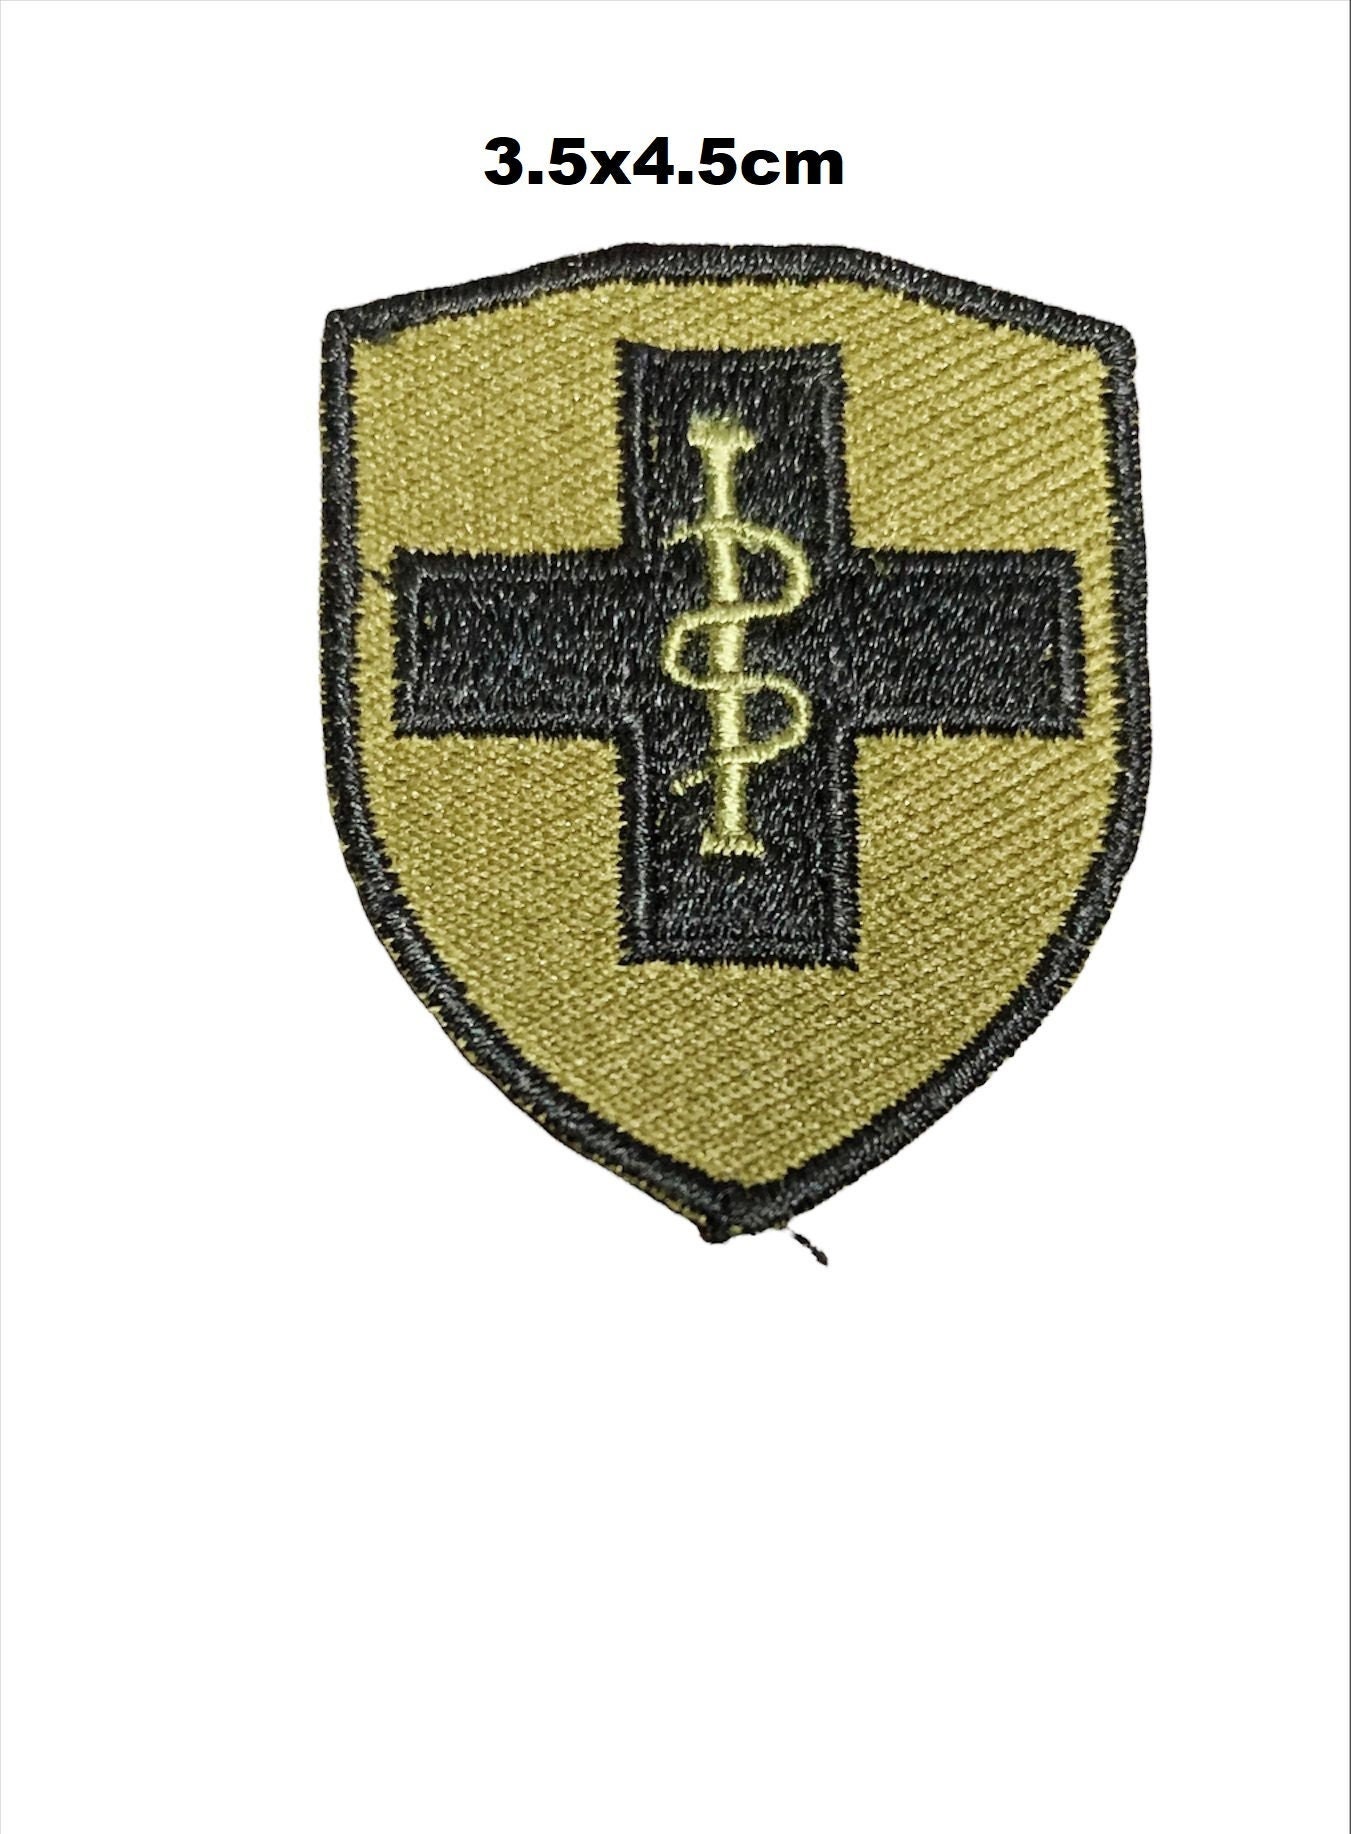 11 Colors Gothic Cross Iron-on Patches, Cross Patches, Embroidered Cross  Patches 